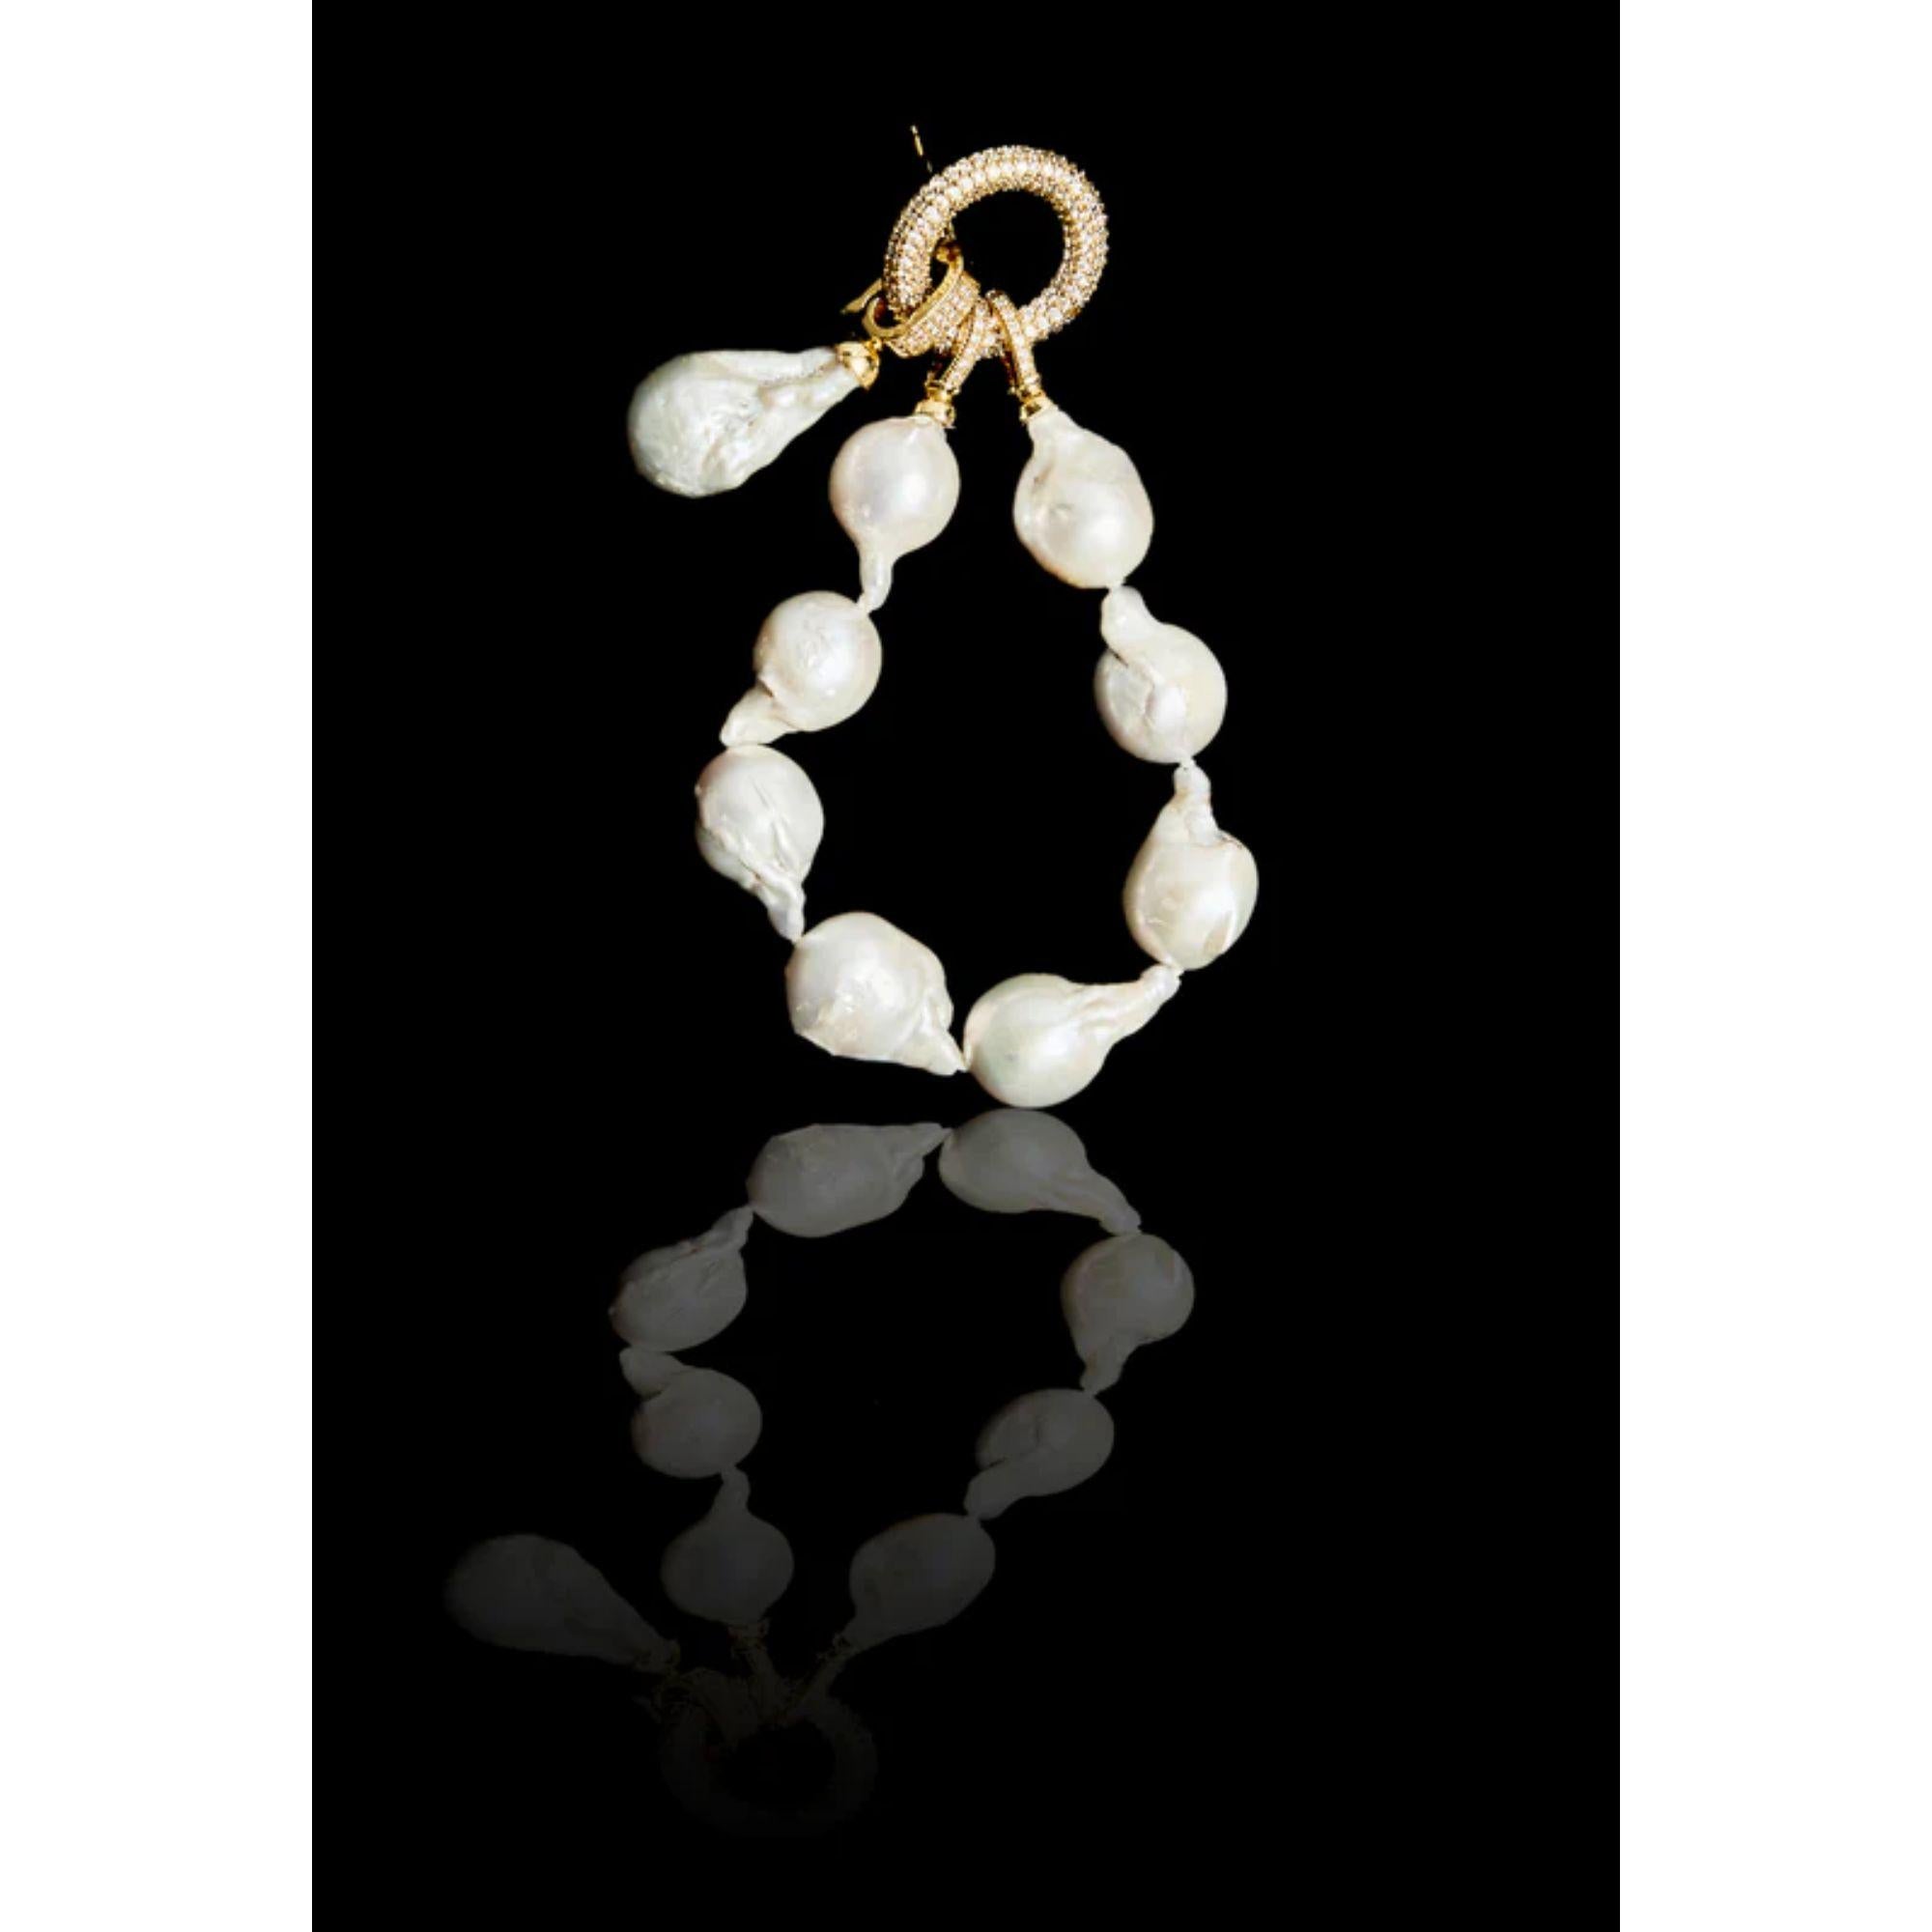 Pearl bracelet with genuine baroque pearls with an adorned lock shining with crystals and a removable oversized genuine baroque pearl charm. Goes perfect with the double pearl ring and the matching baroque pearl harness